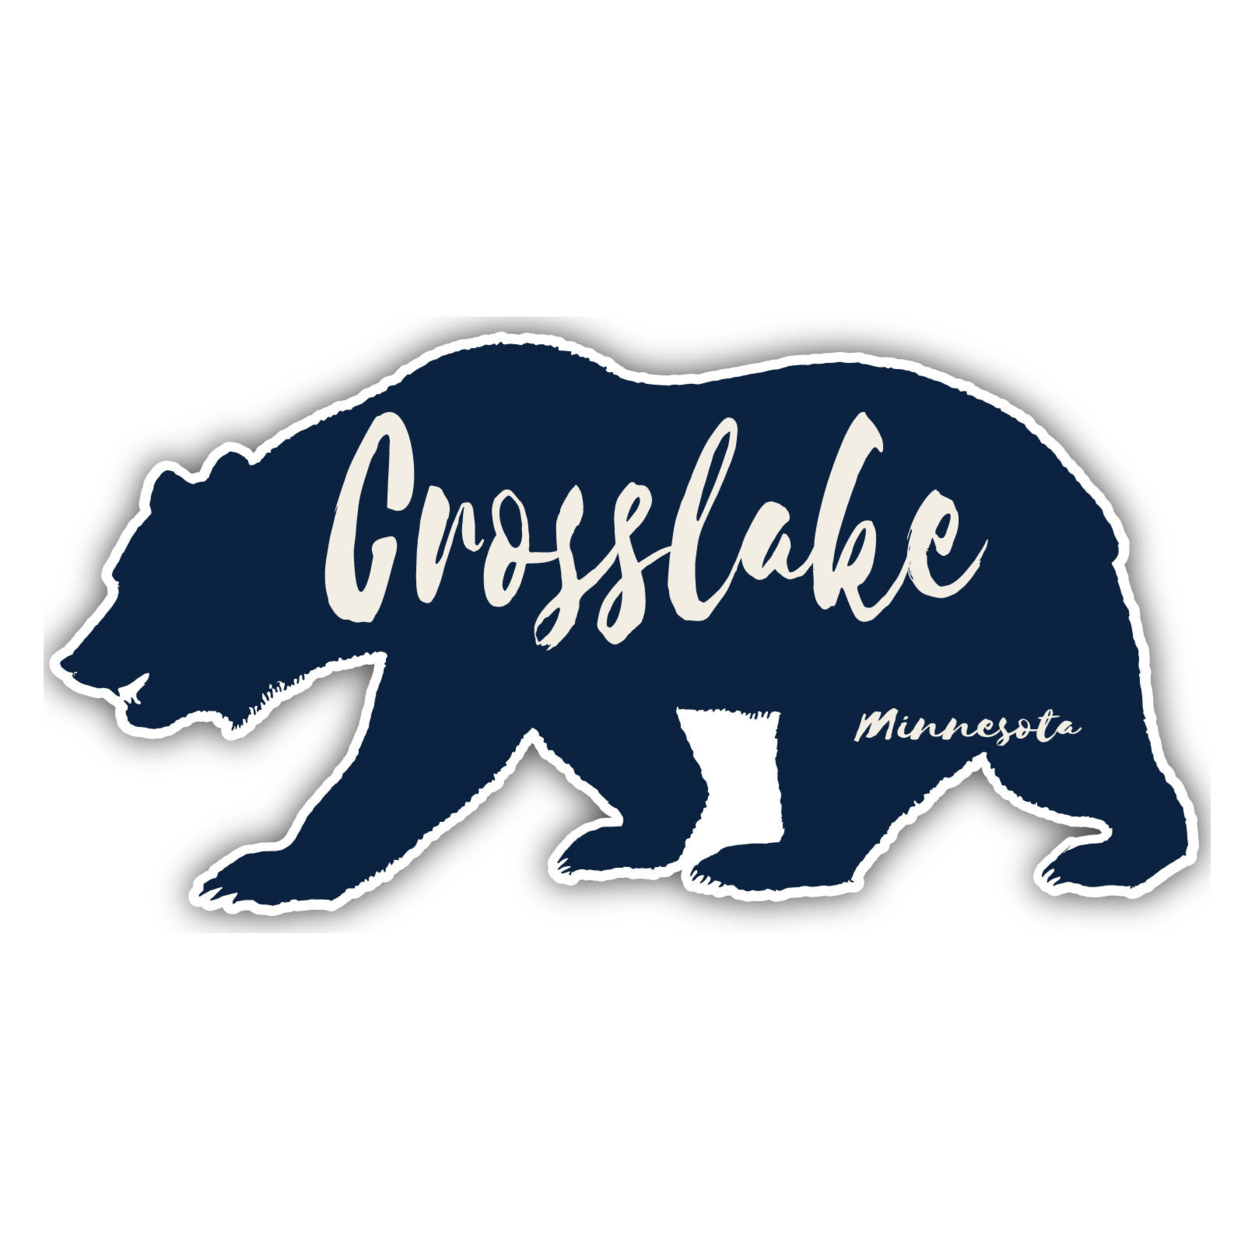 Crosslake Minnesota Souvenir Decorative Stickers (Choose Theme And Size) - Single Unit, 12-Inch, Great Outdoors